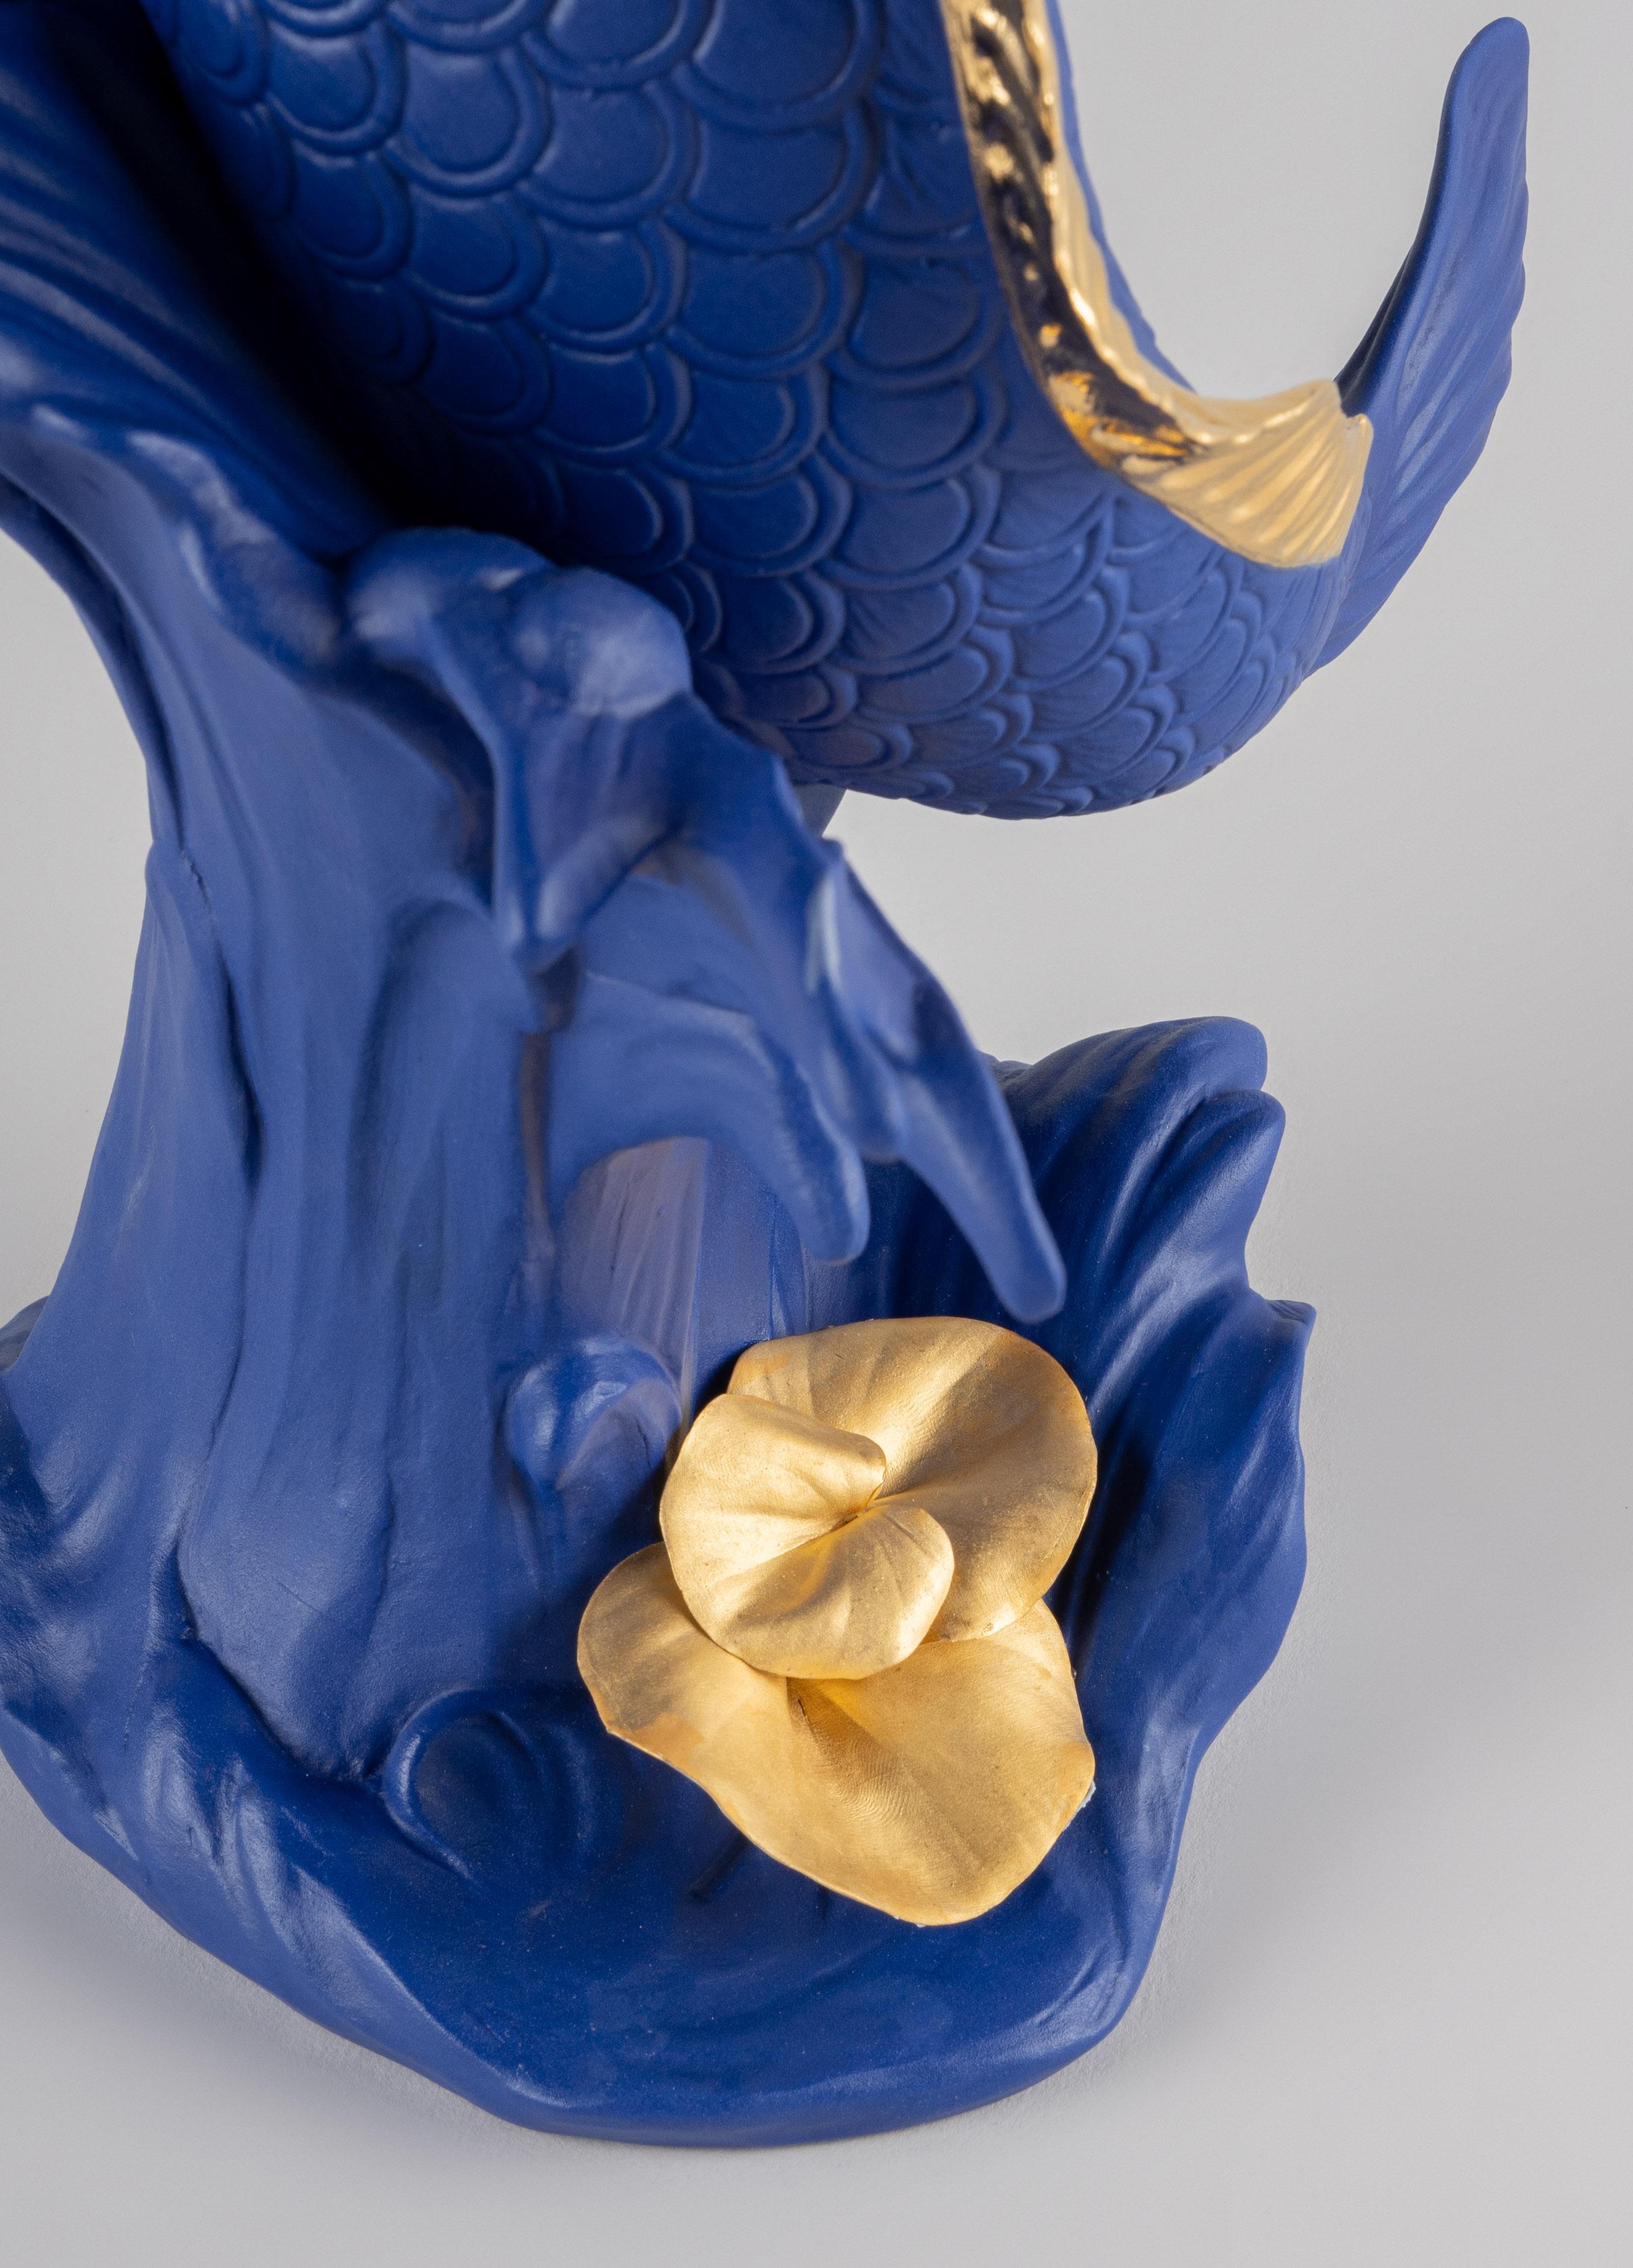 Lladró Koi Sculpture, Blue-Gold, Limited Edition In New Condition For Sale In New York City, NY